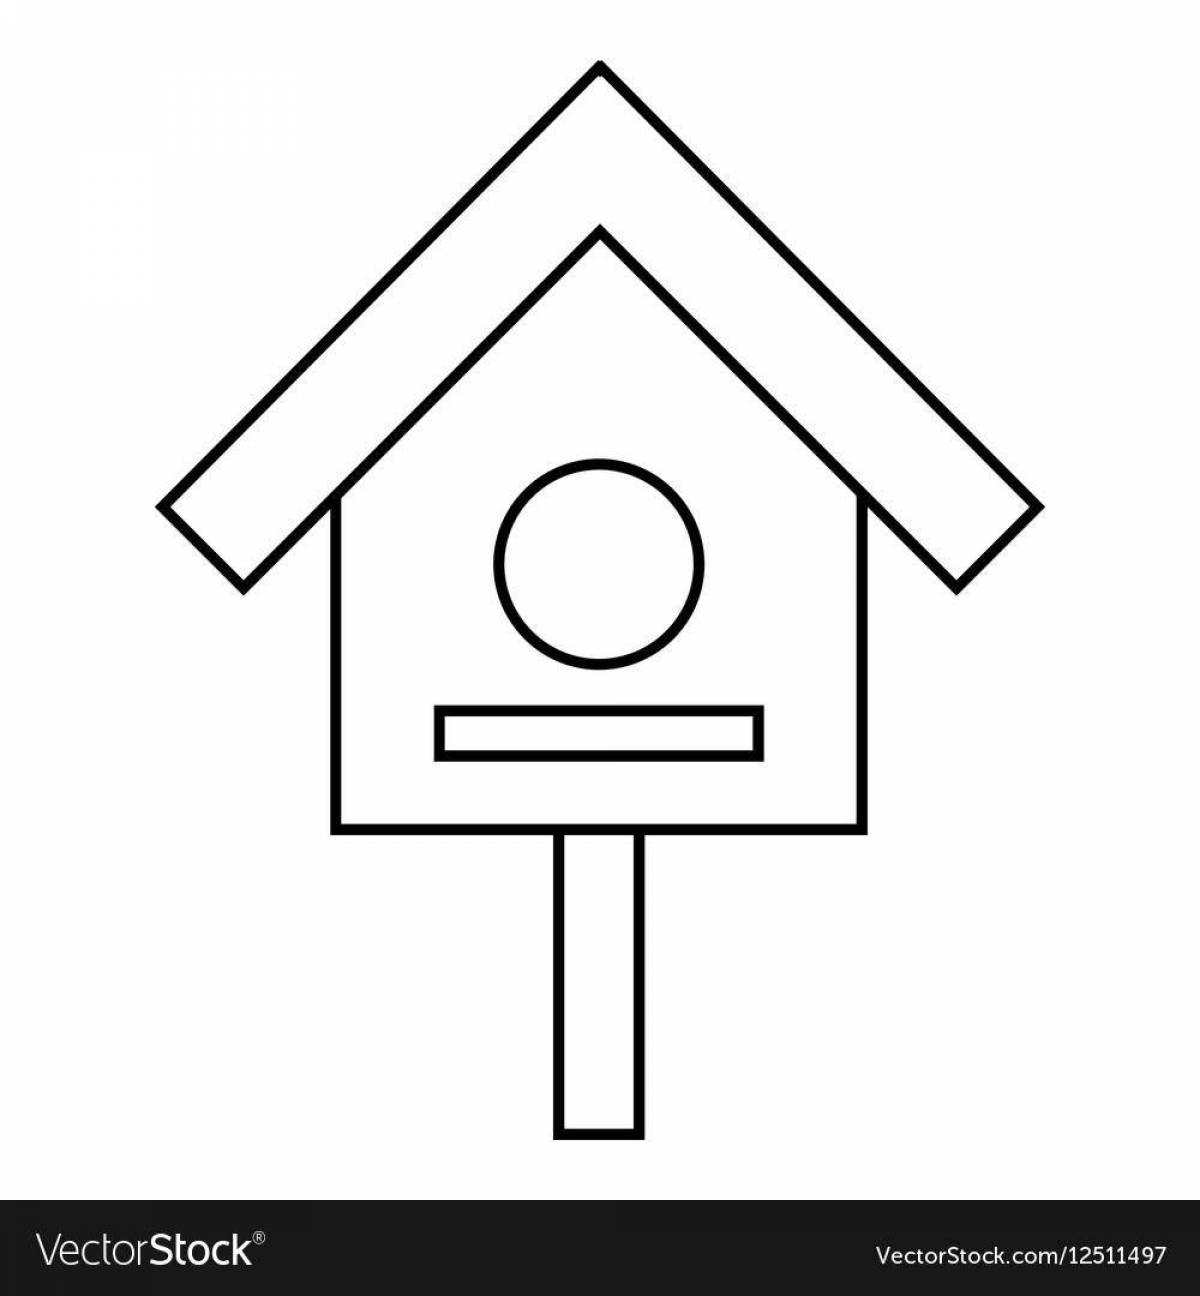 Adorable birdhouse coloring page for 3-4 year olds